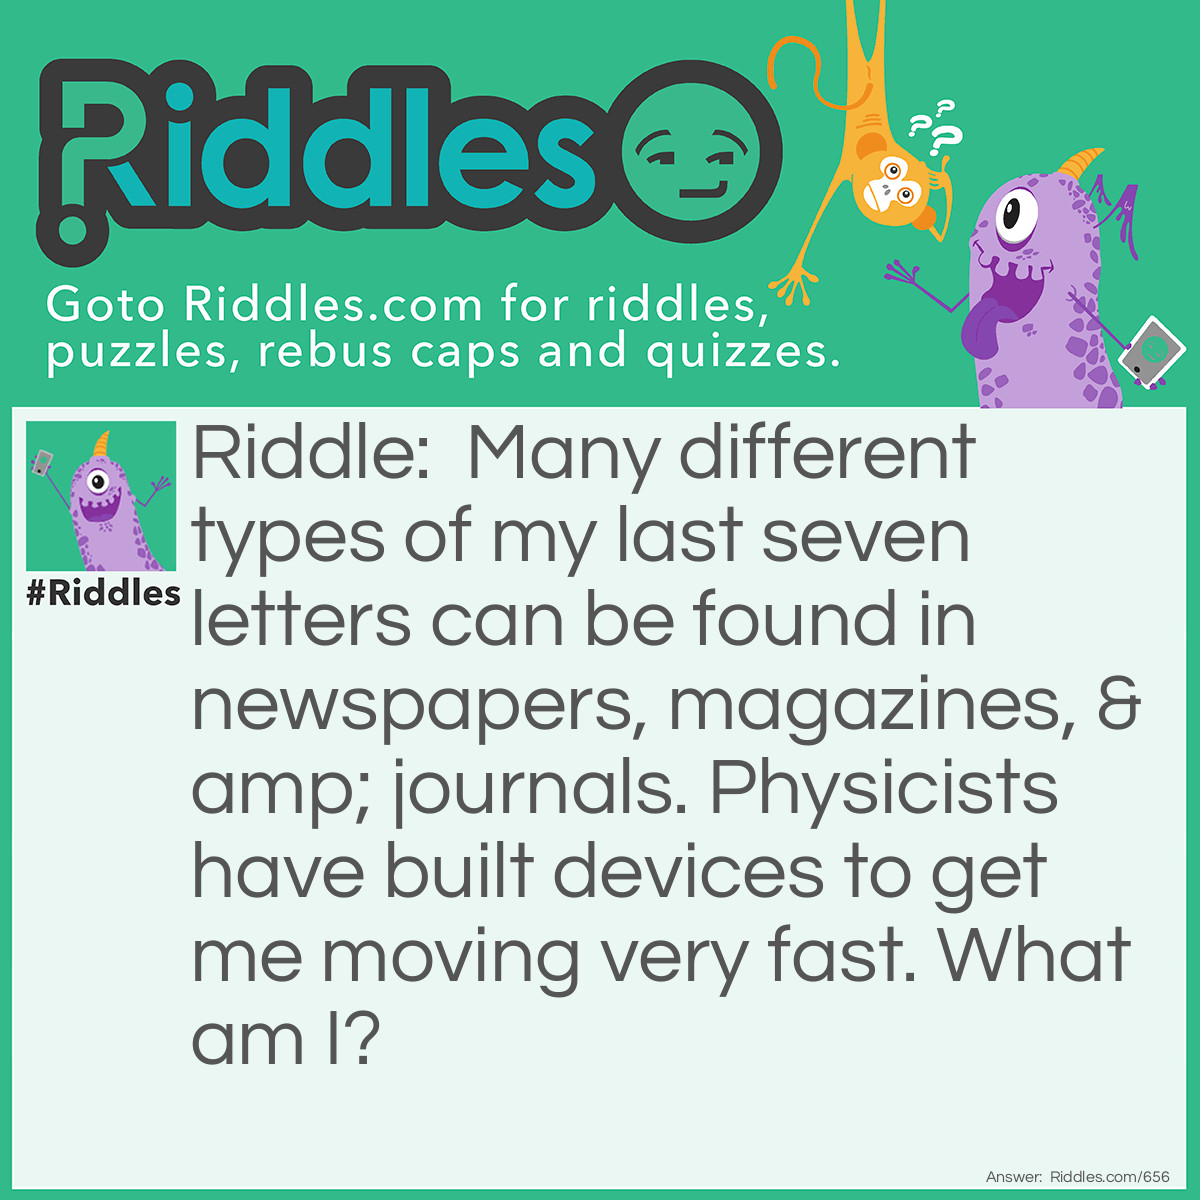 Riddle: Many different types of my last seven letters can be found in newspapers, magazines, & journals. Physicists have built devices to get me moving very fast. What am I? Answer: Particles!